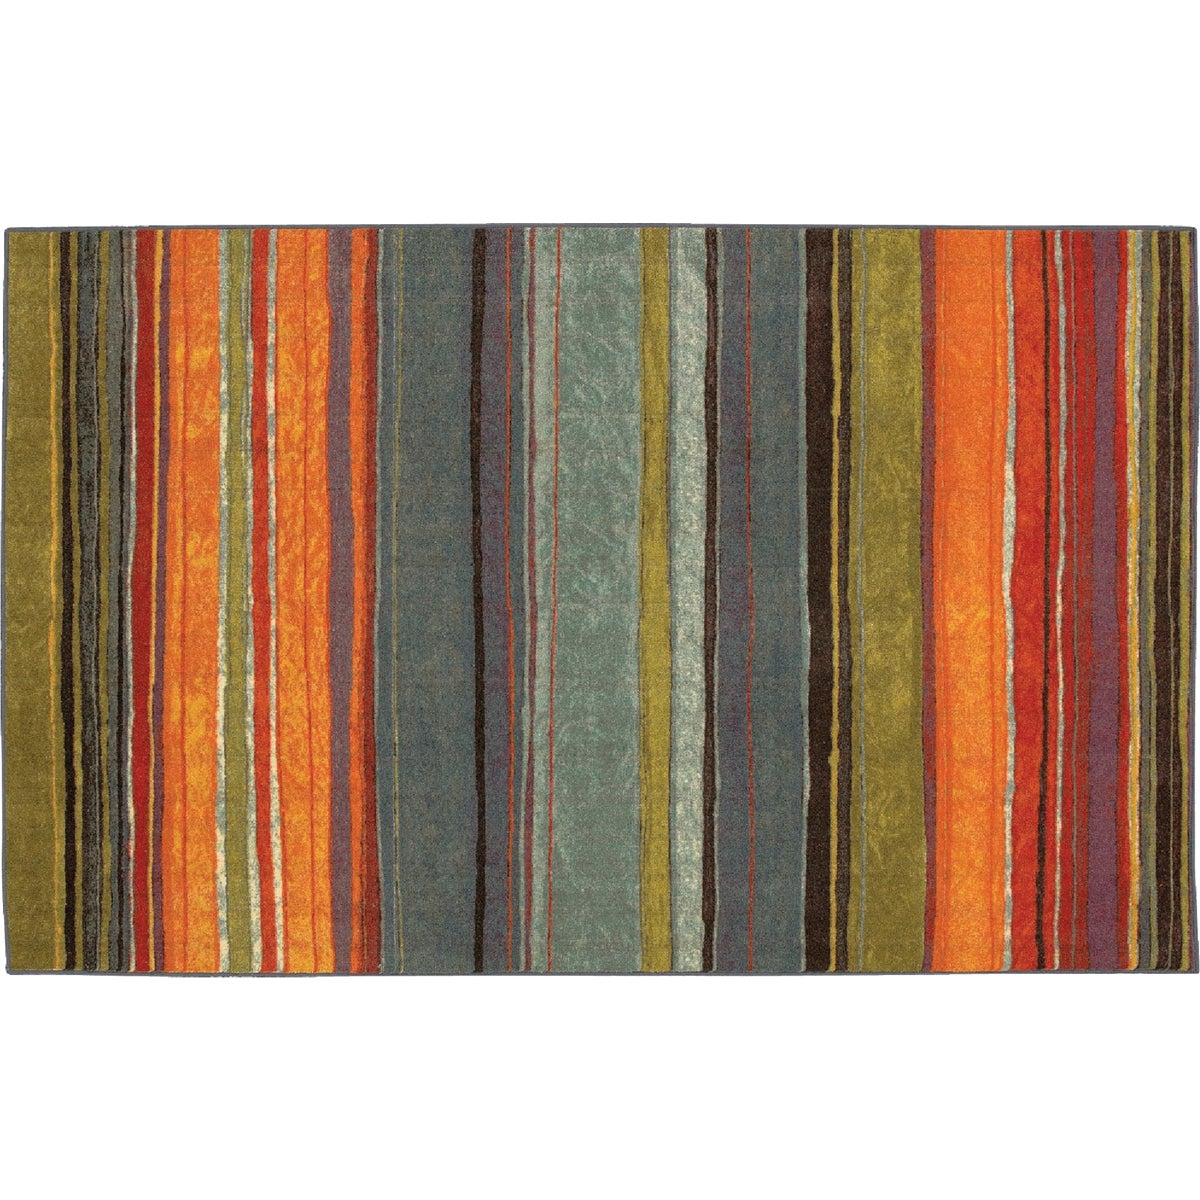 Item 278548, A carnival of color, the stripe pattern of our Rainbow Rug will invigorate 